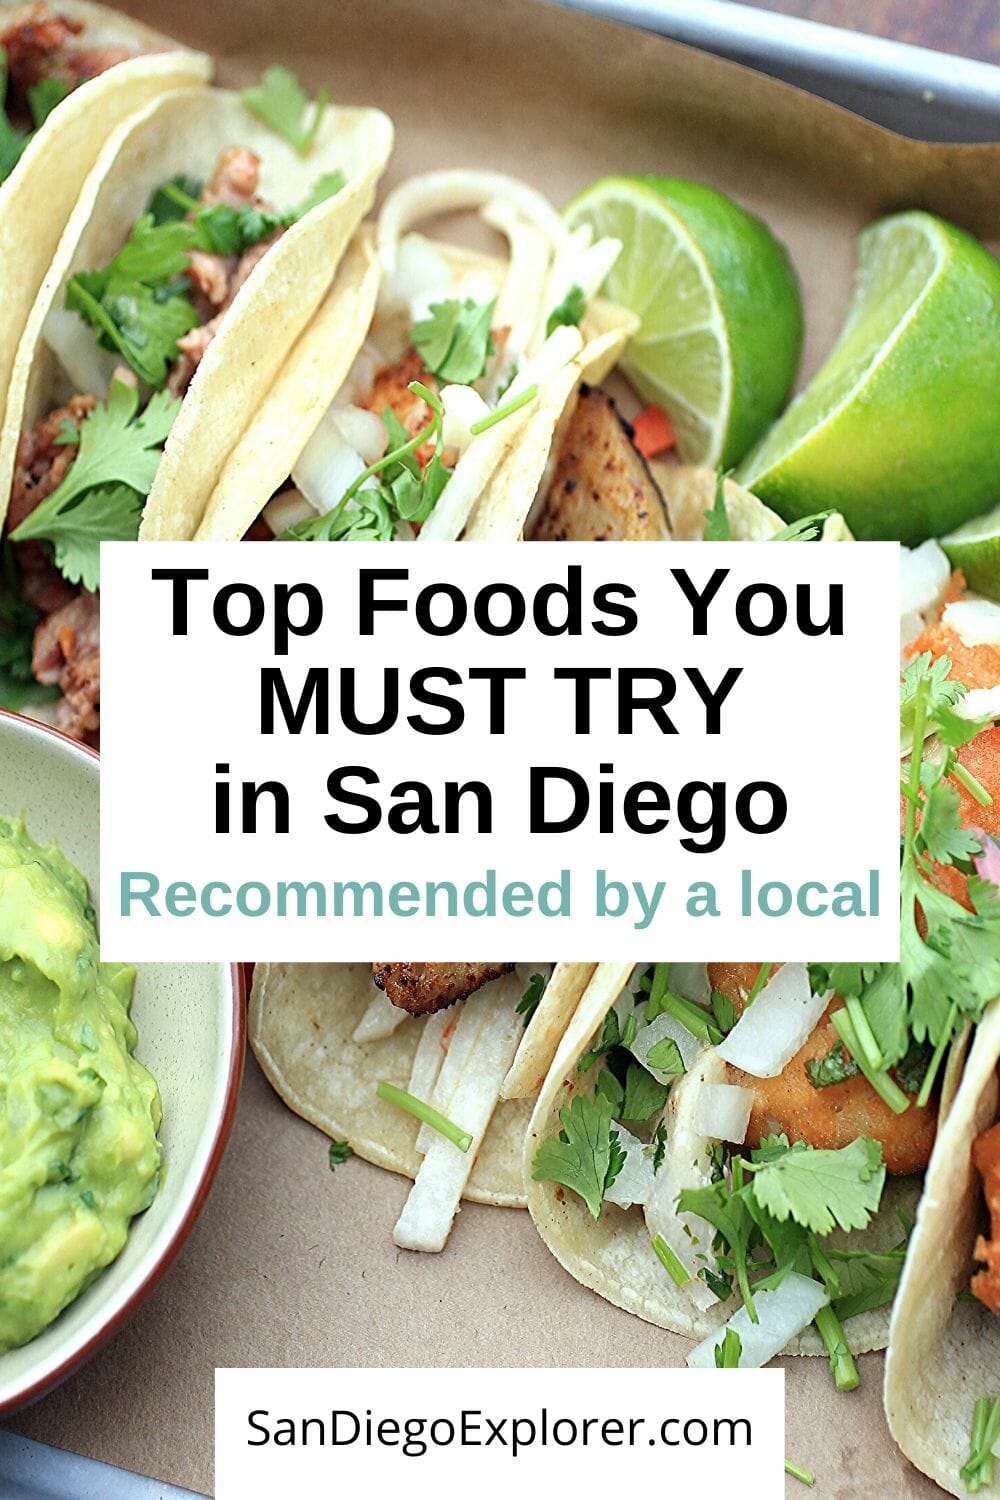 Top Foods To Try in San Diego - San Diego Explorer